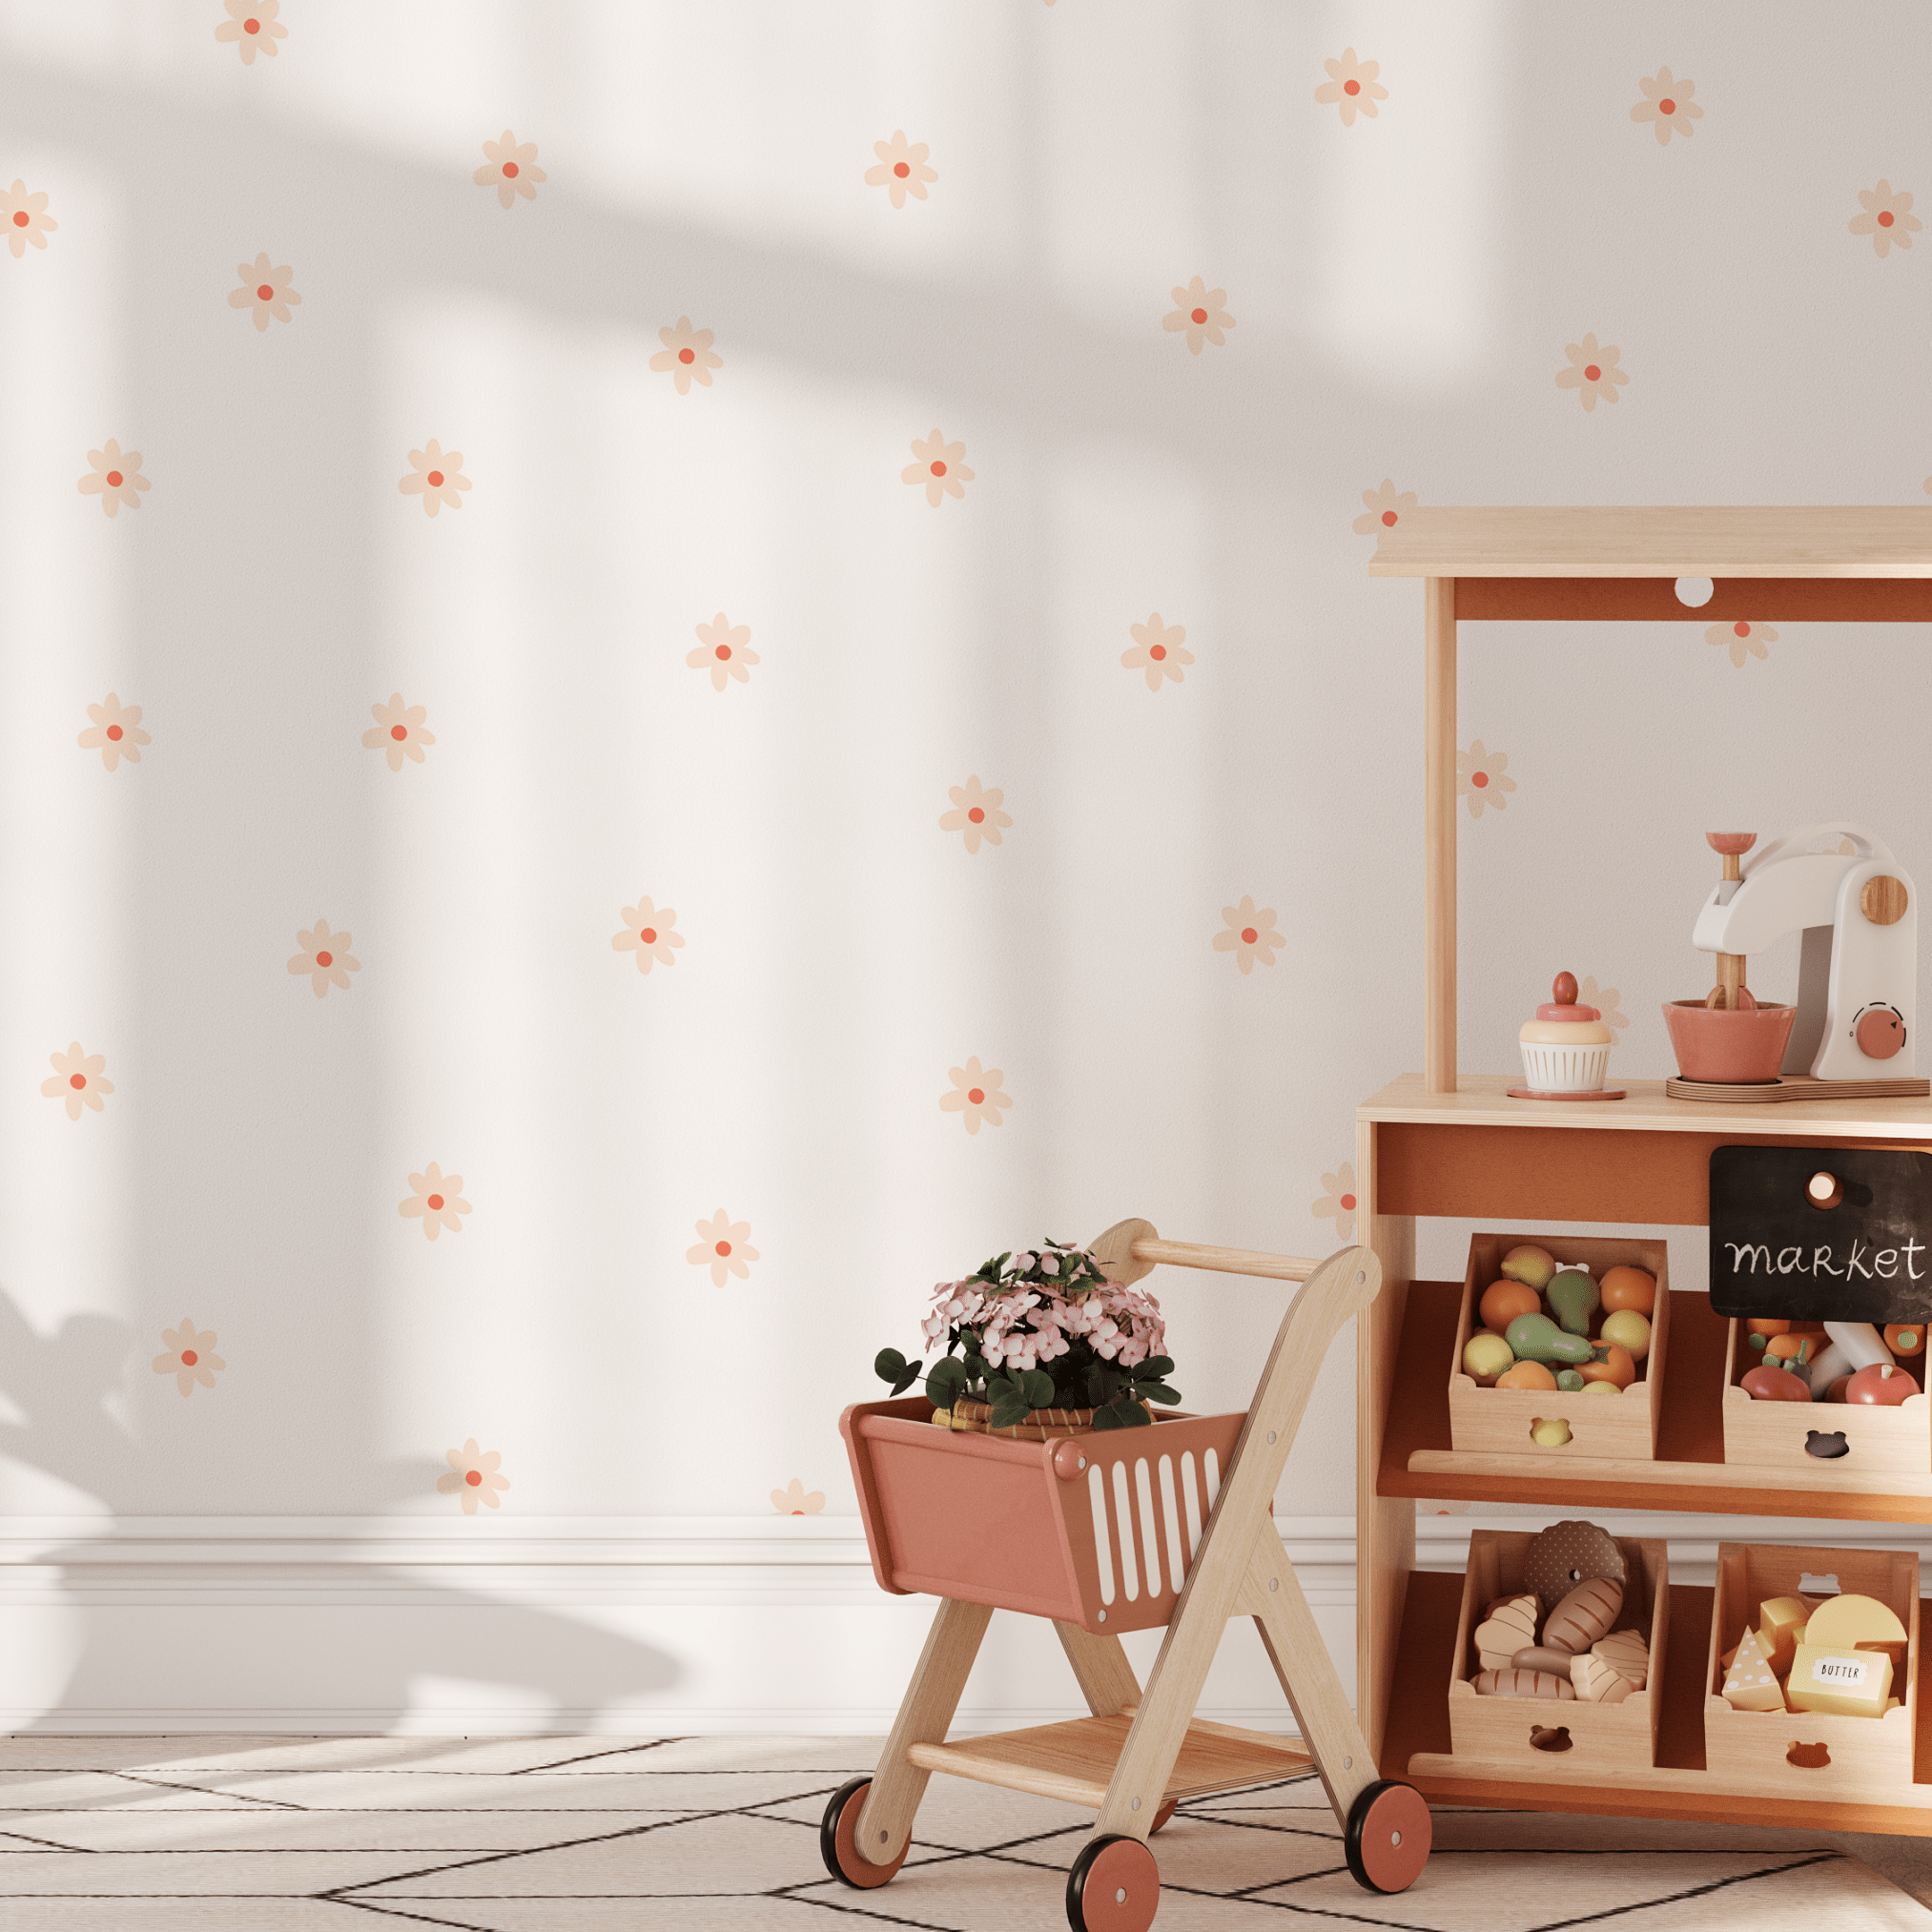 Small dainty floral daisy wall stickers in a child's play area